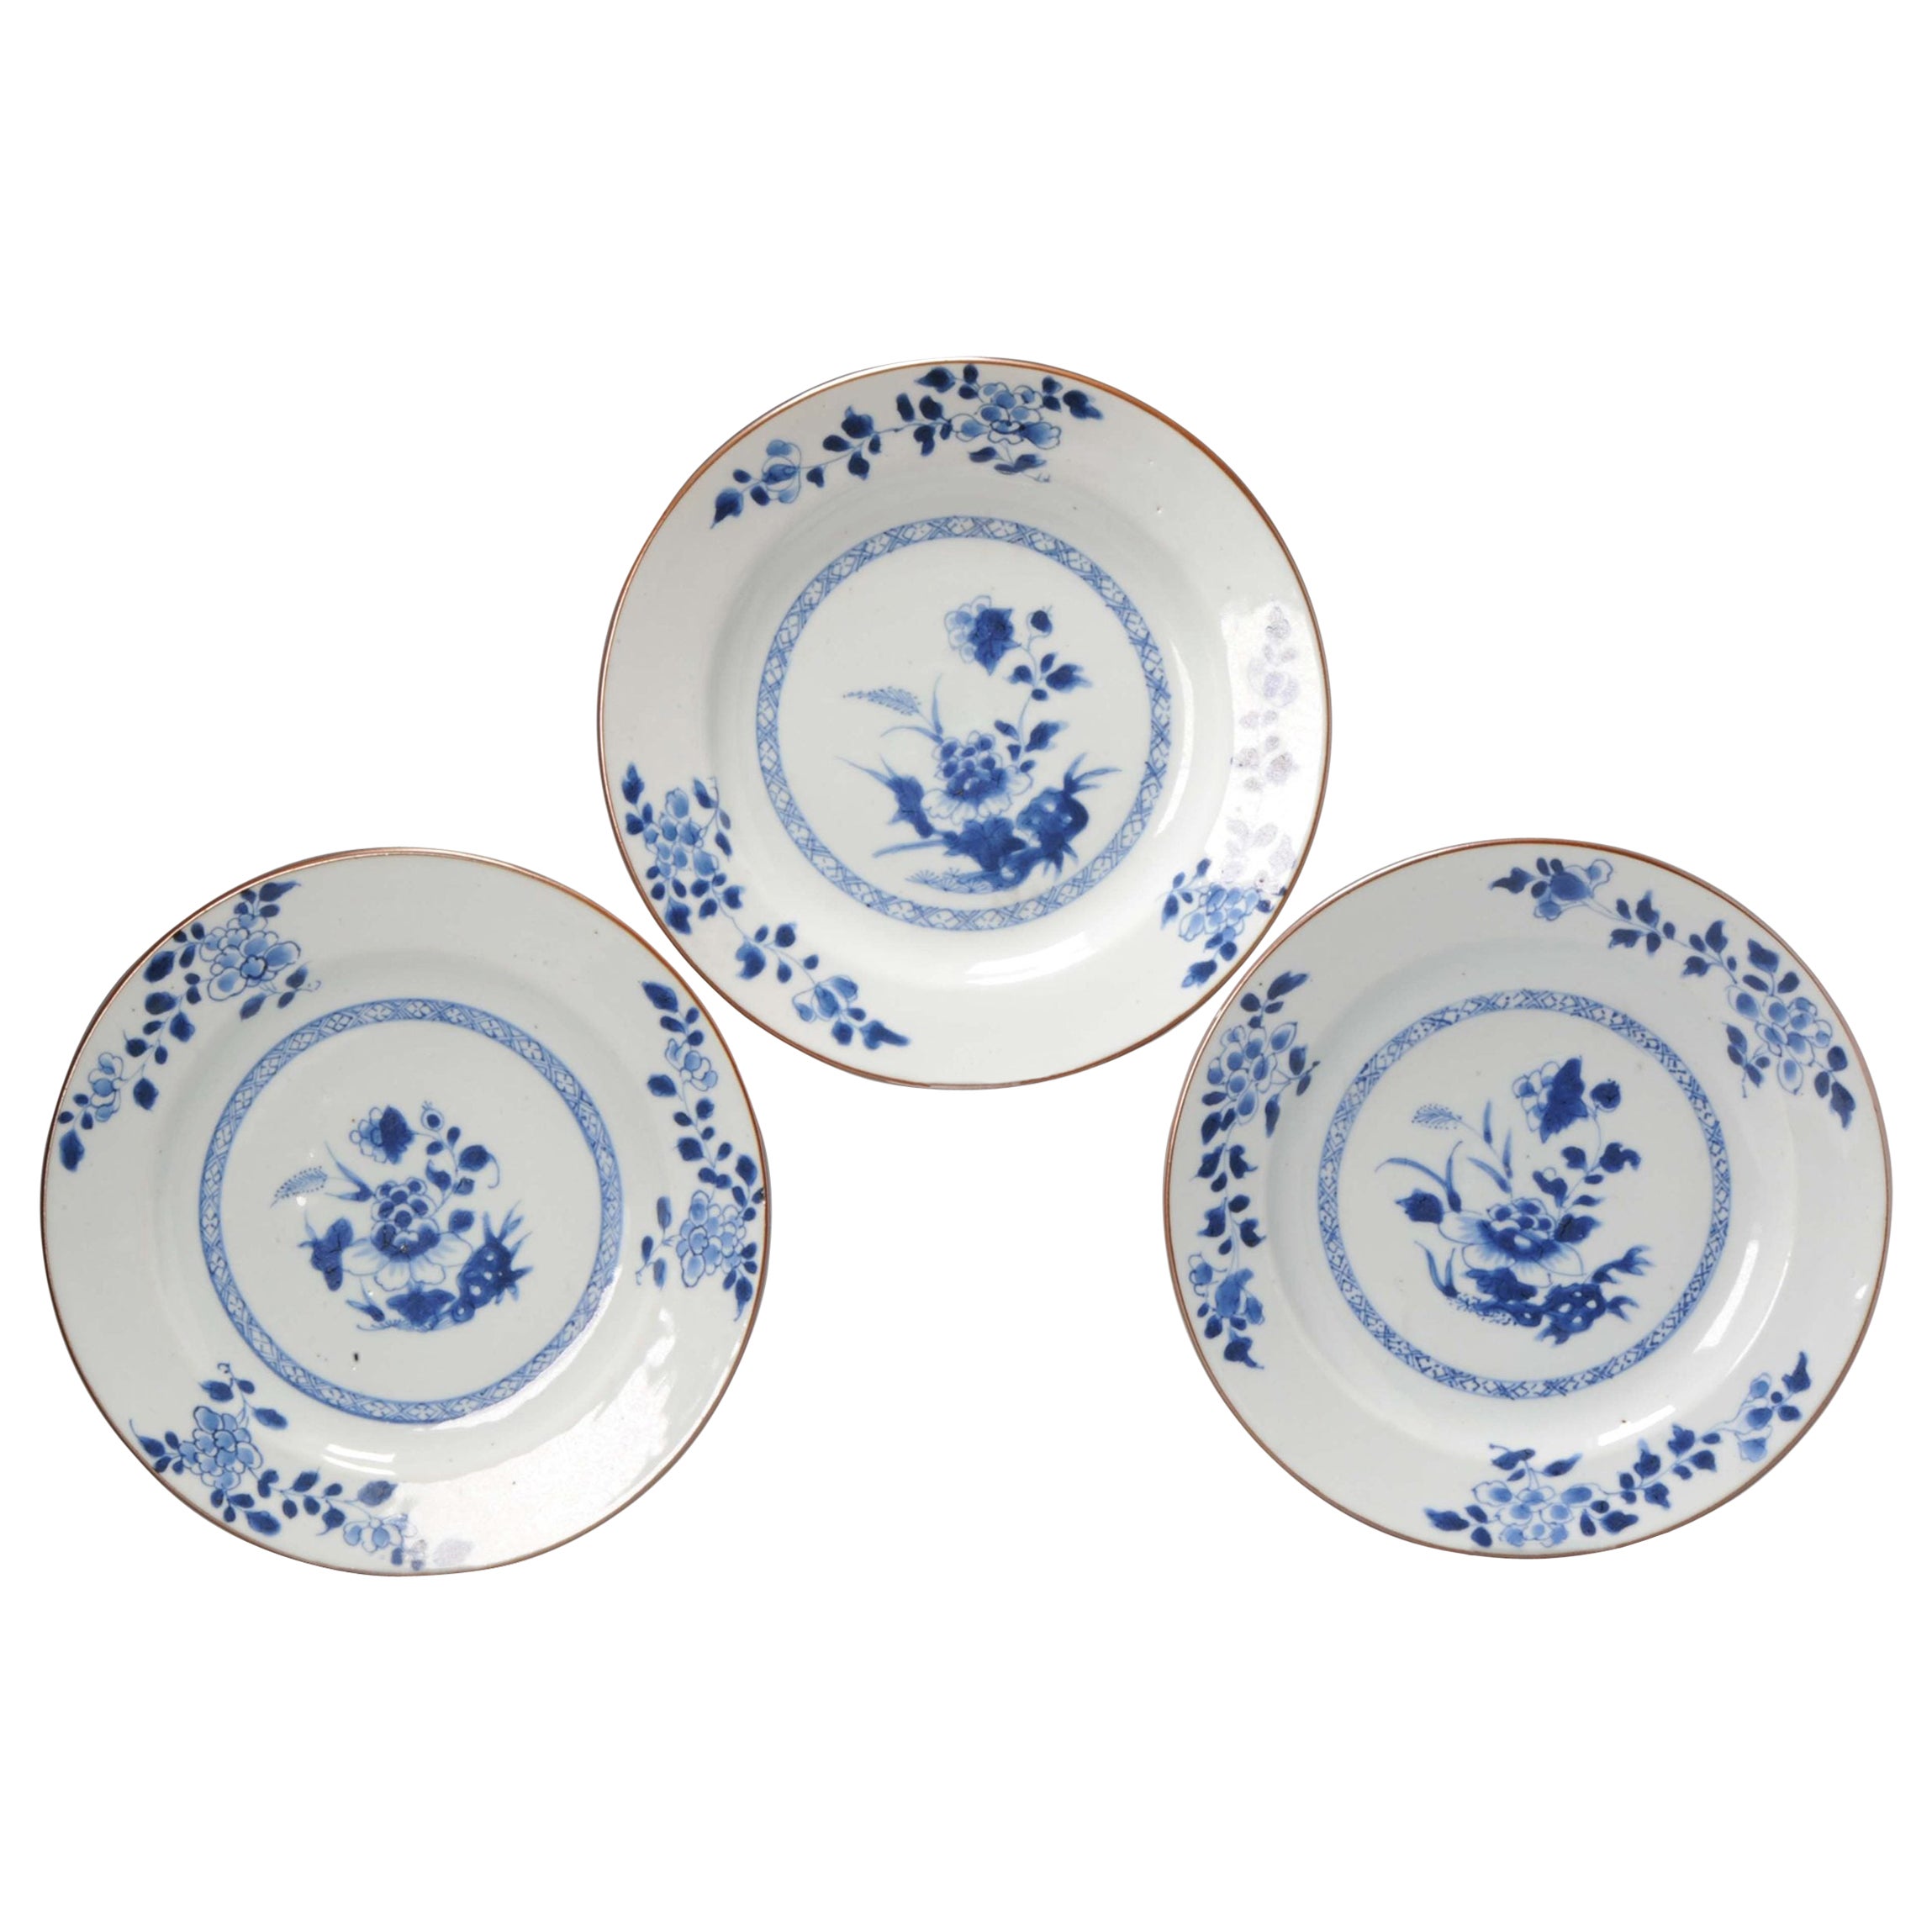 A Dinner Set of Yongzheng Period Chinese Porcelain Floral Plates, China